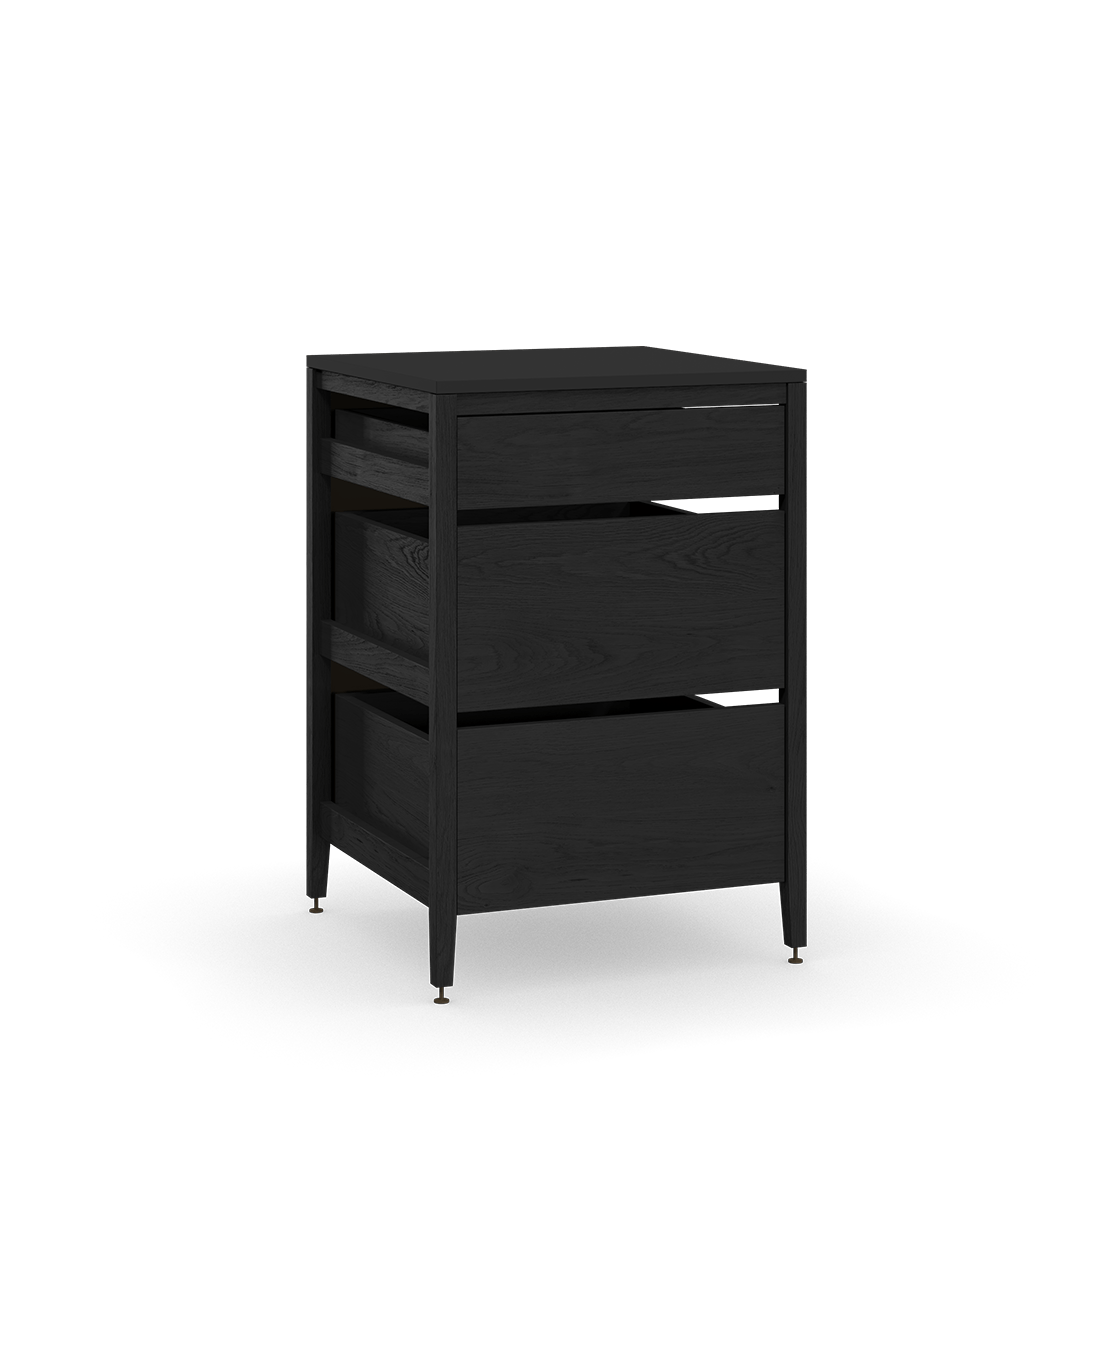 Coquo modular kitchen cabinet with 3 wood drawers in black stained oak. 